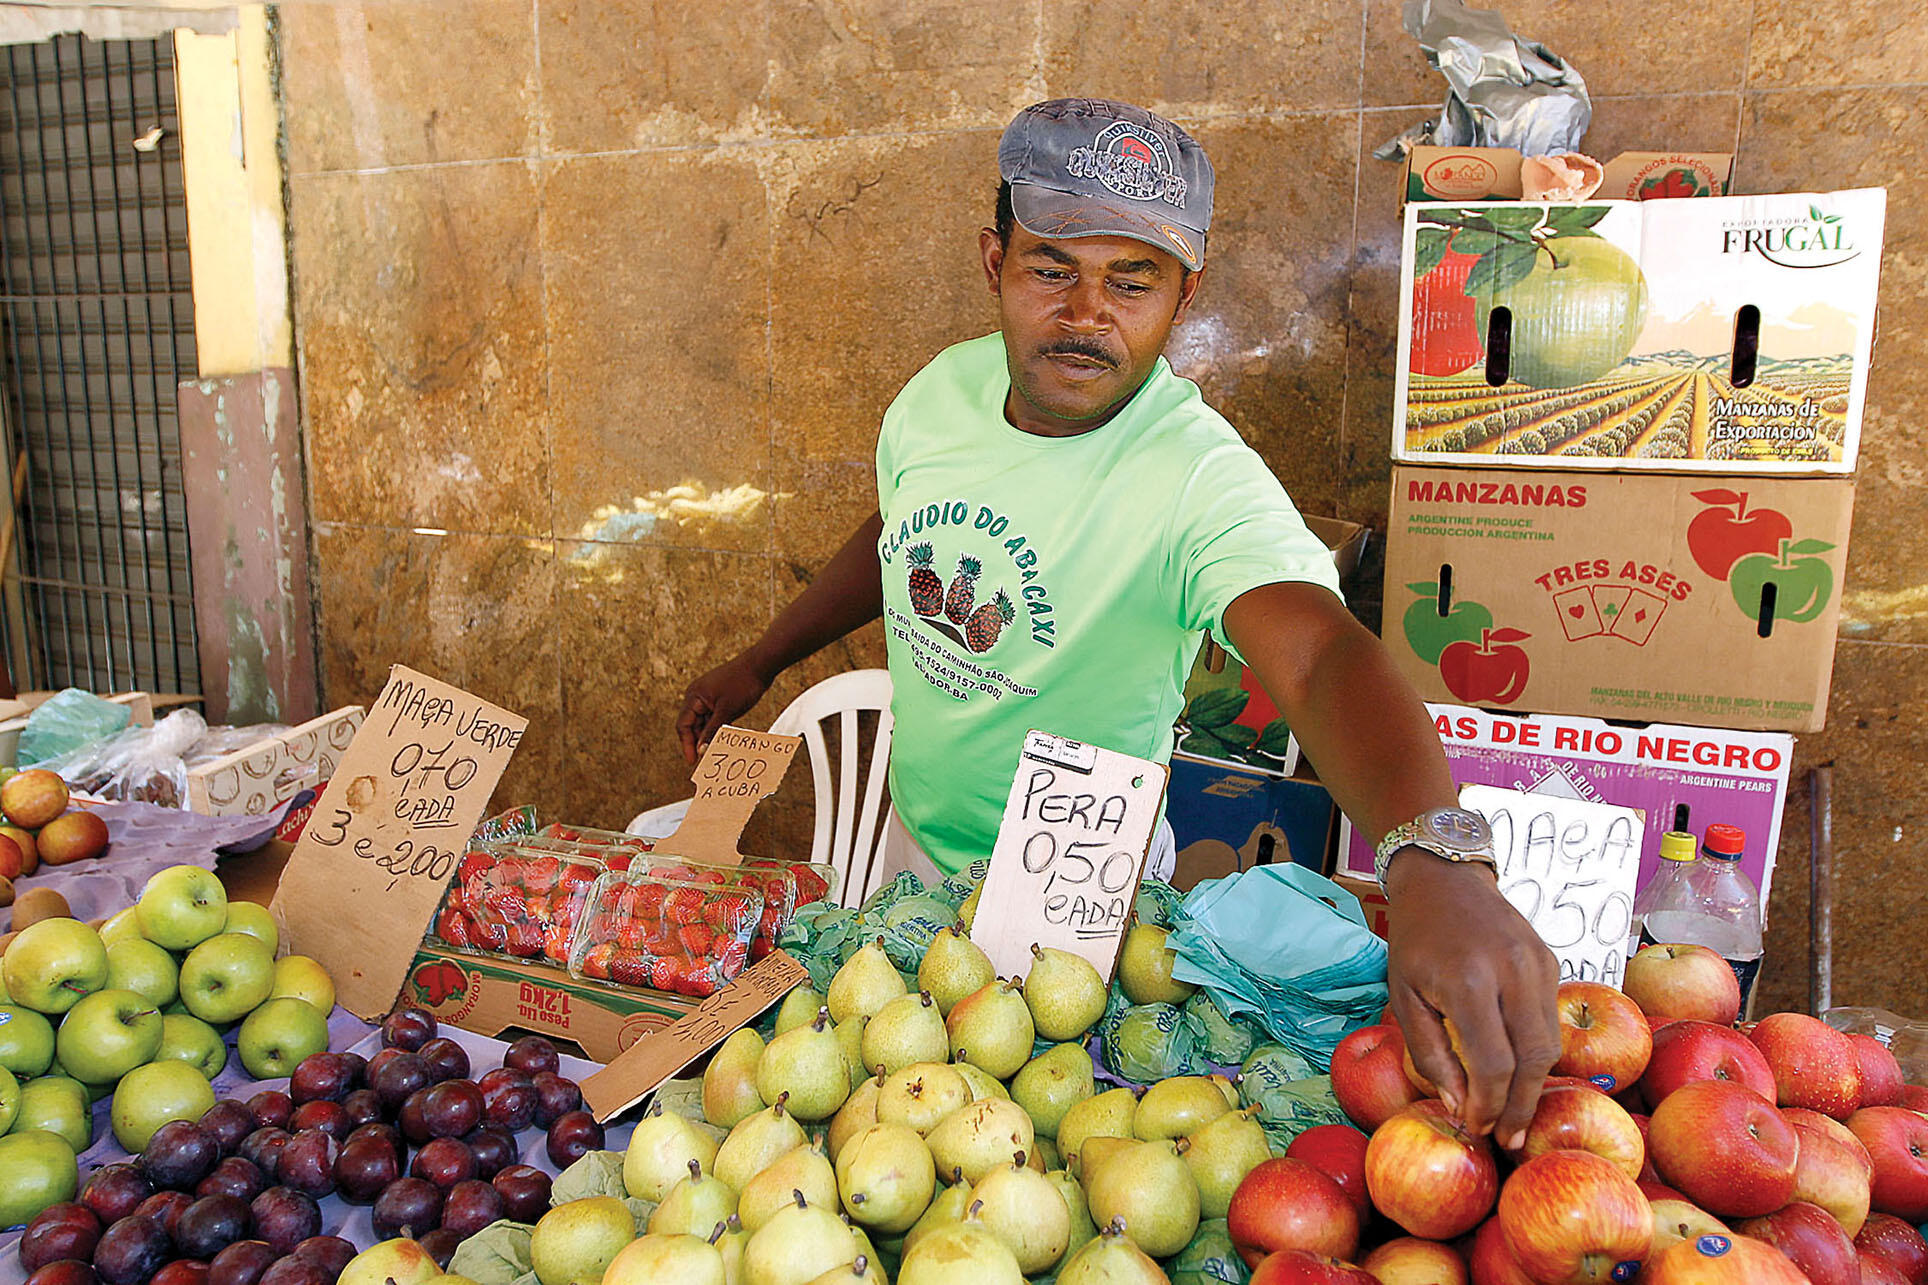  a fruit vendor sets up a stand on the street.